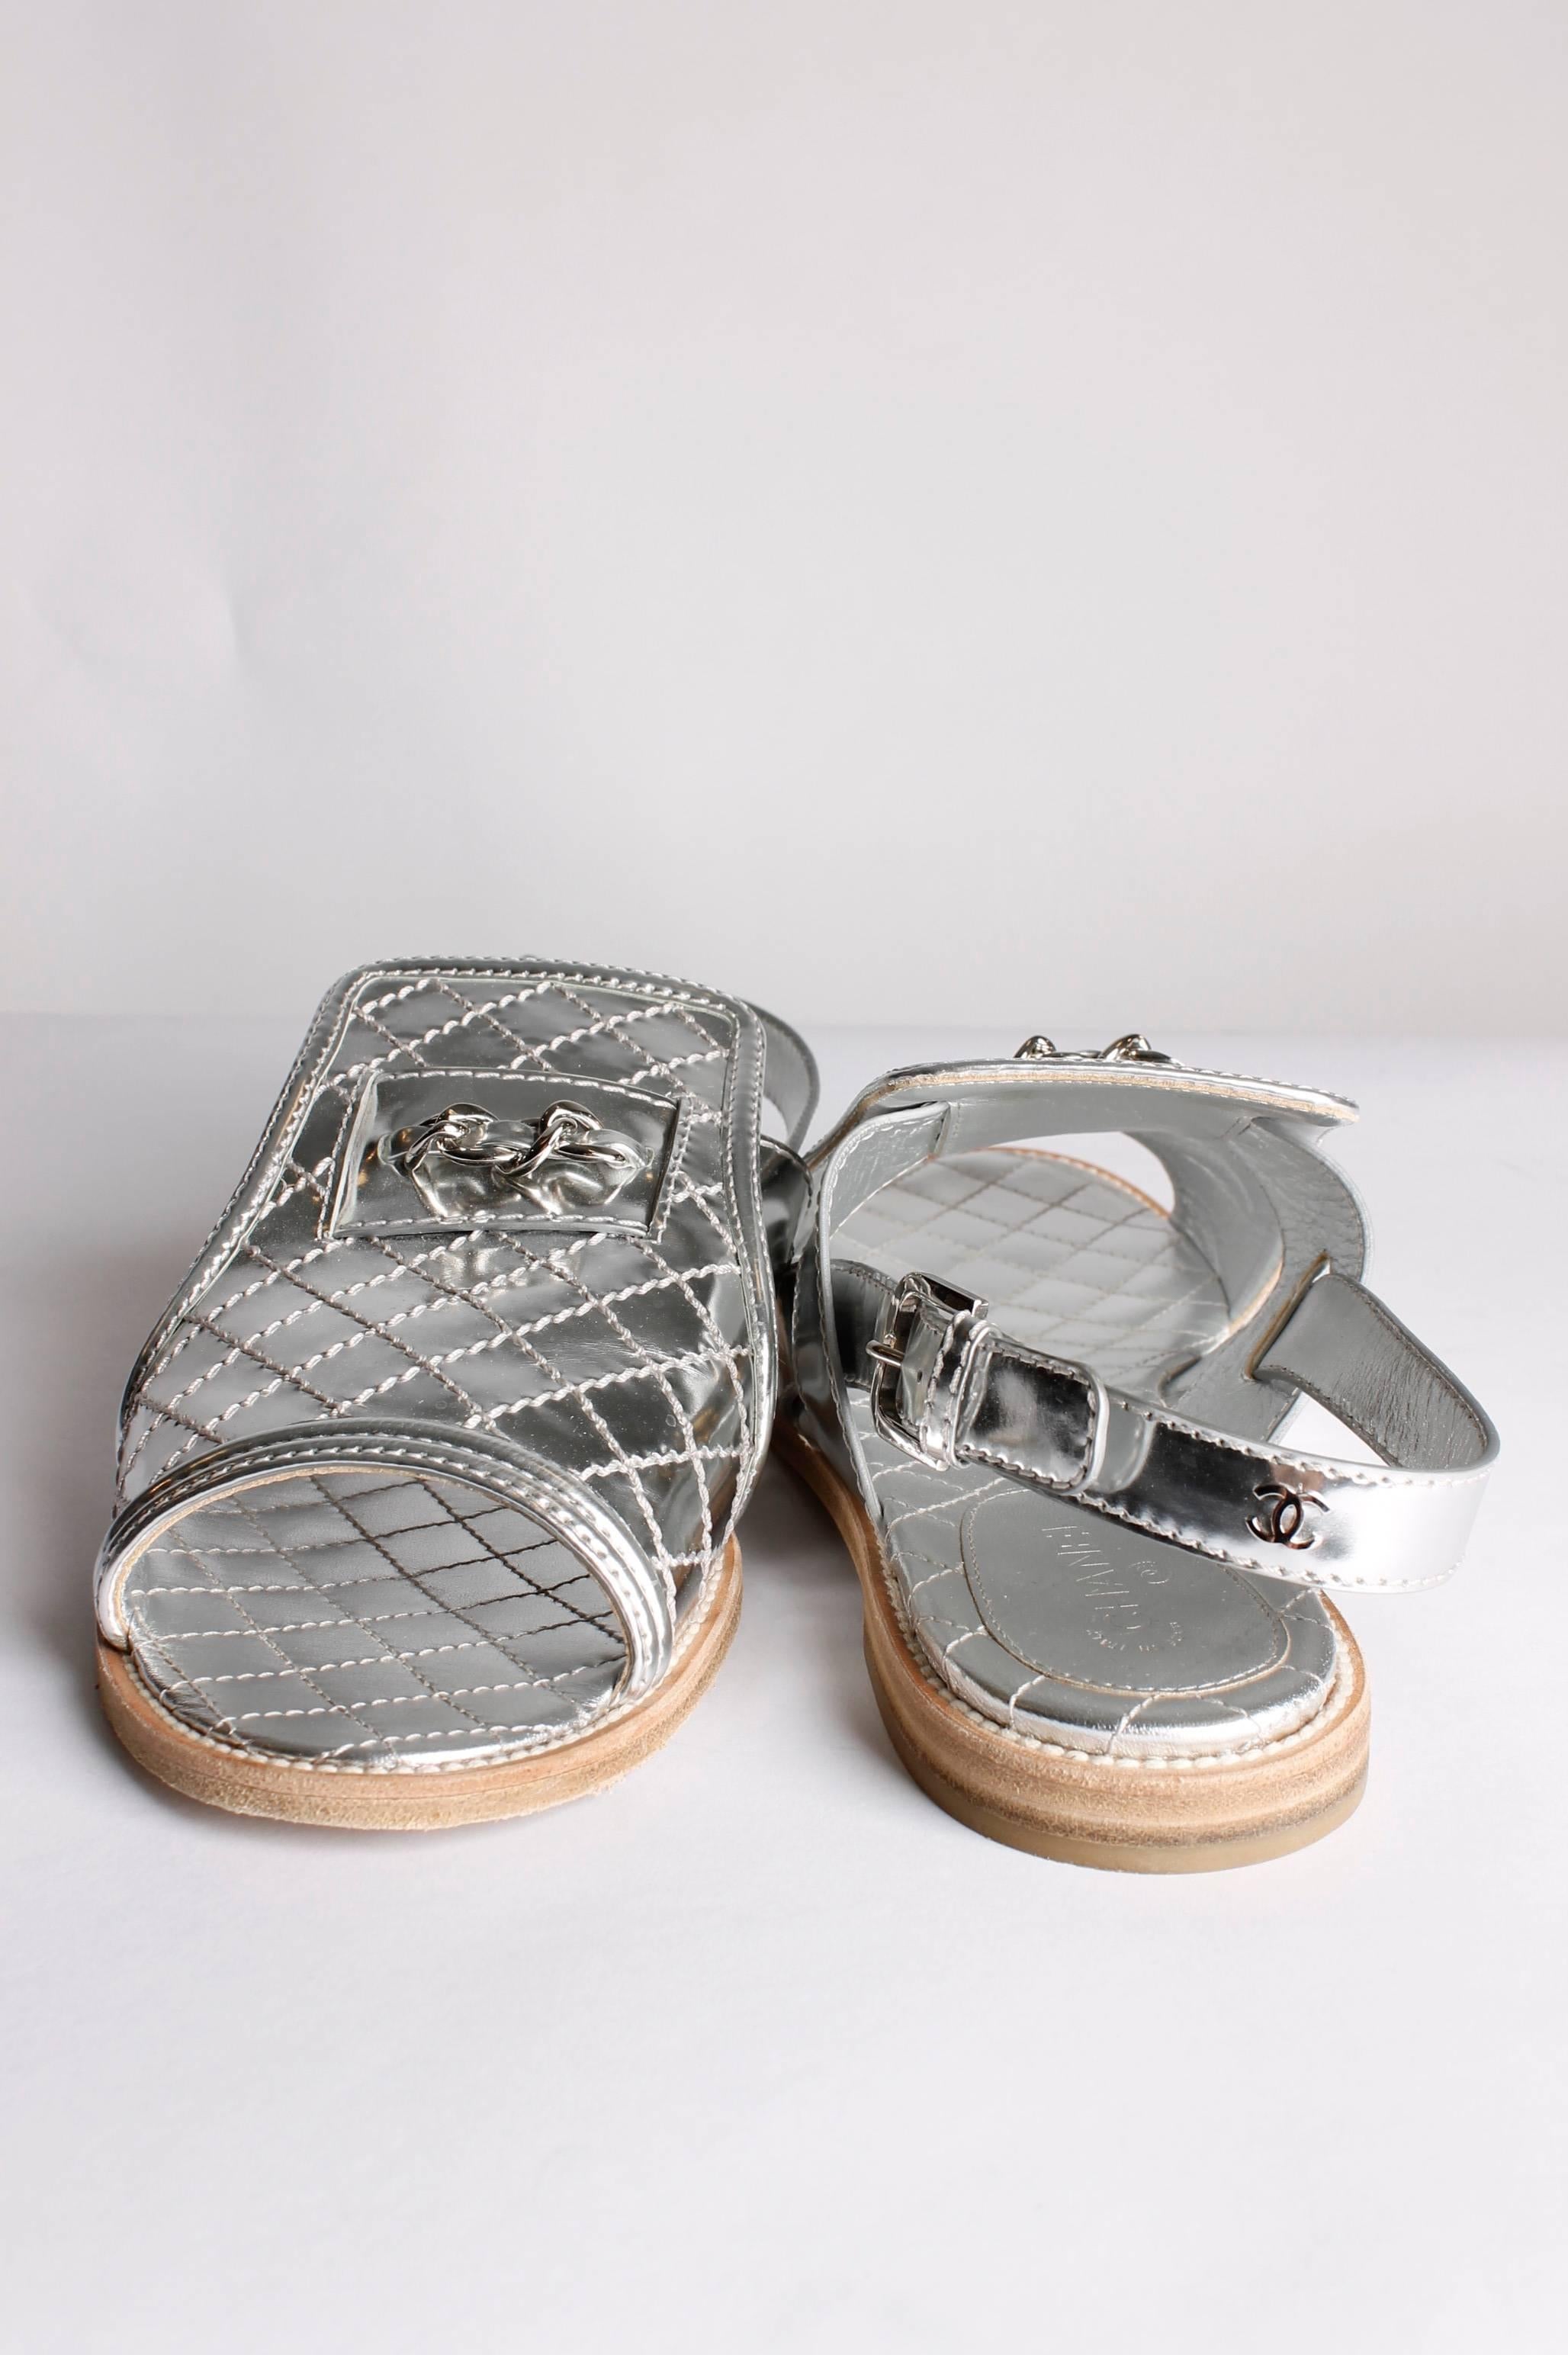 This pair shines right at you, fantastic Chanel sandals in shiny silver.

Fully quilted silver leather, a peep-toe and a heel-strap. Heel measures 1,5 centimeters, leather sole. On the front a little piece of a silver chain is attached.

Barely